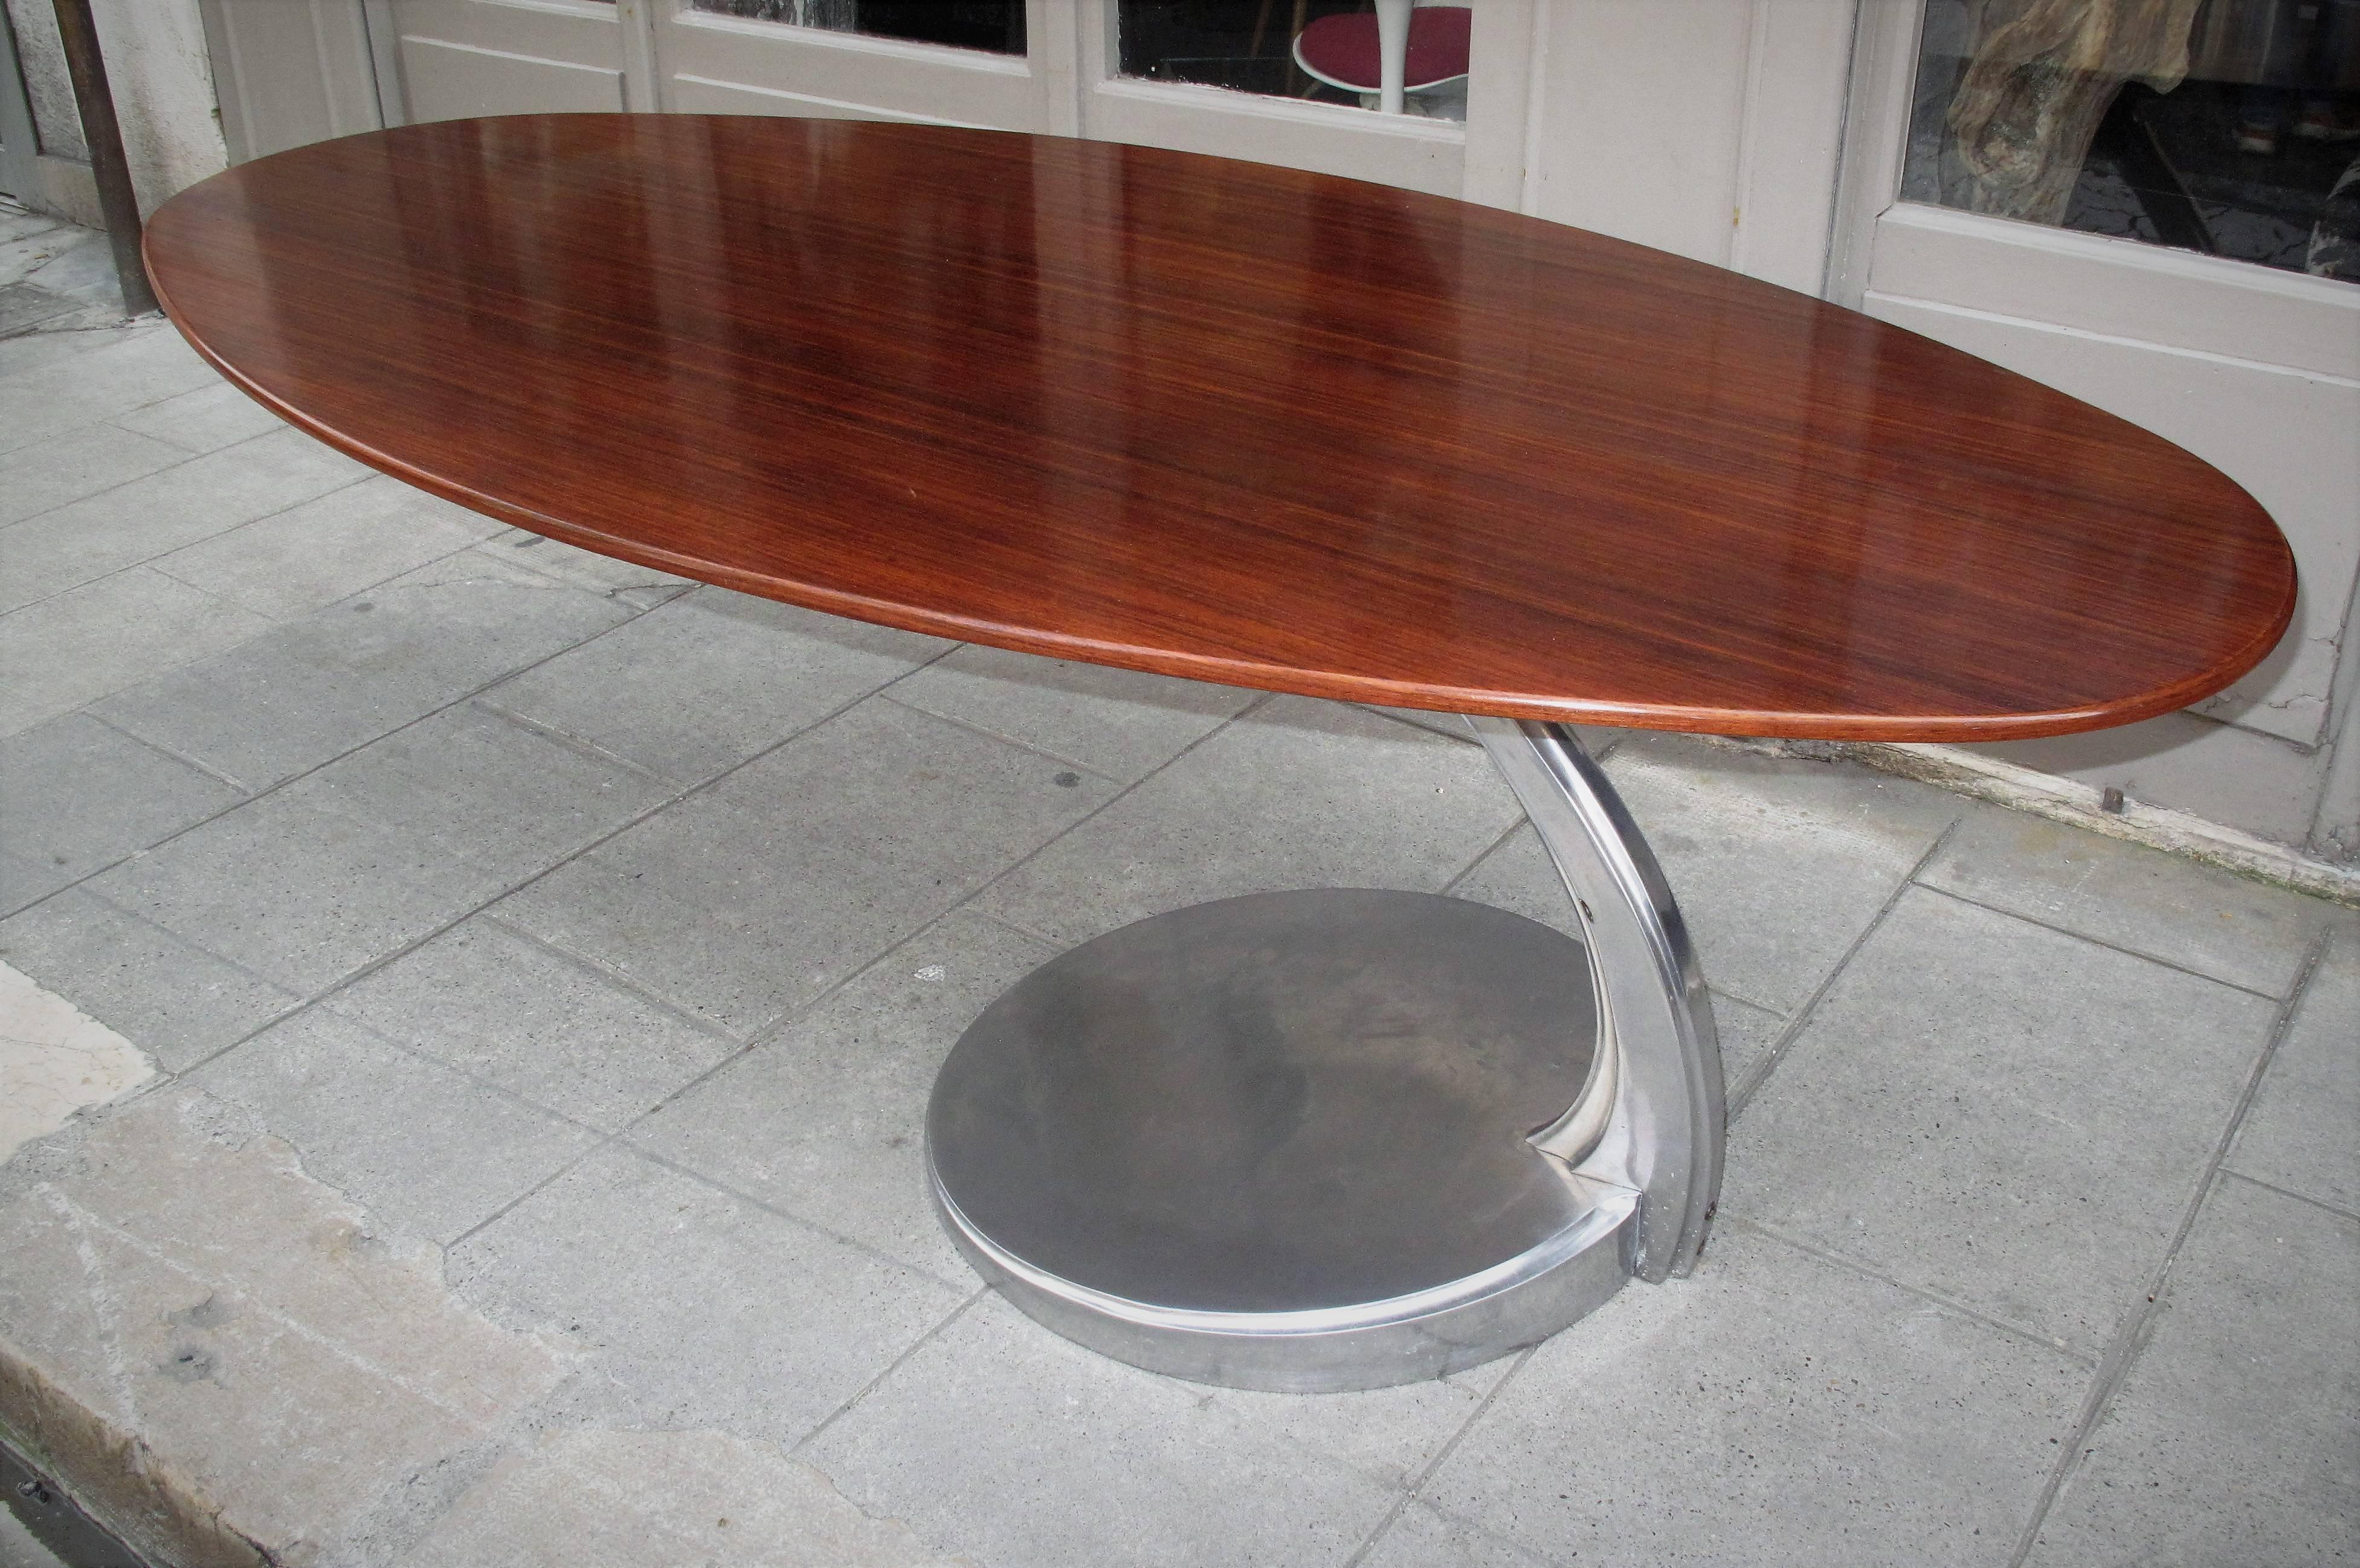 Michele Charron rosewood and aluminium table, circa 1960
Solid cast aluminium cantilevered base with oval rosewood top. Marked Charron Paris, France.